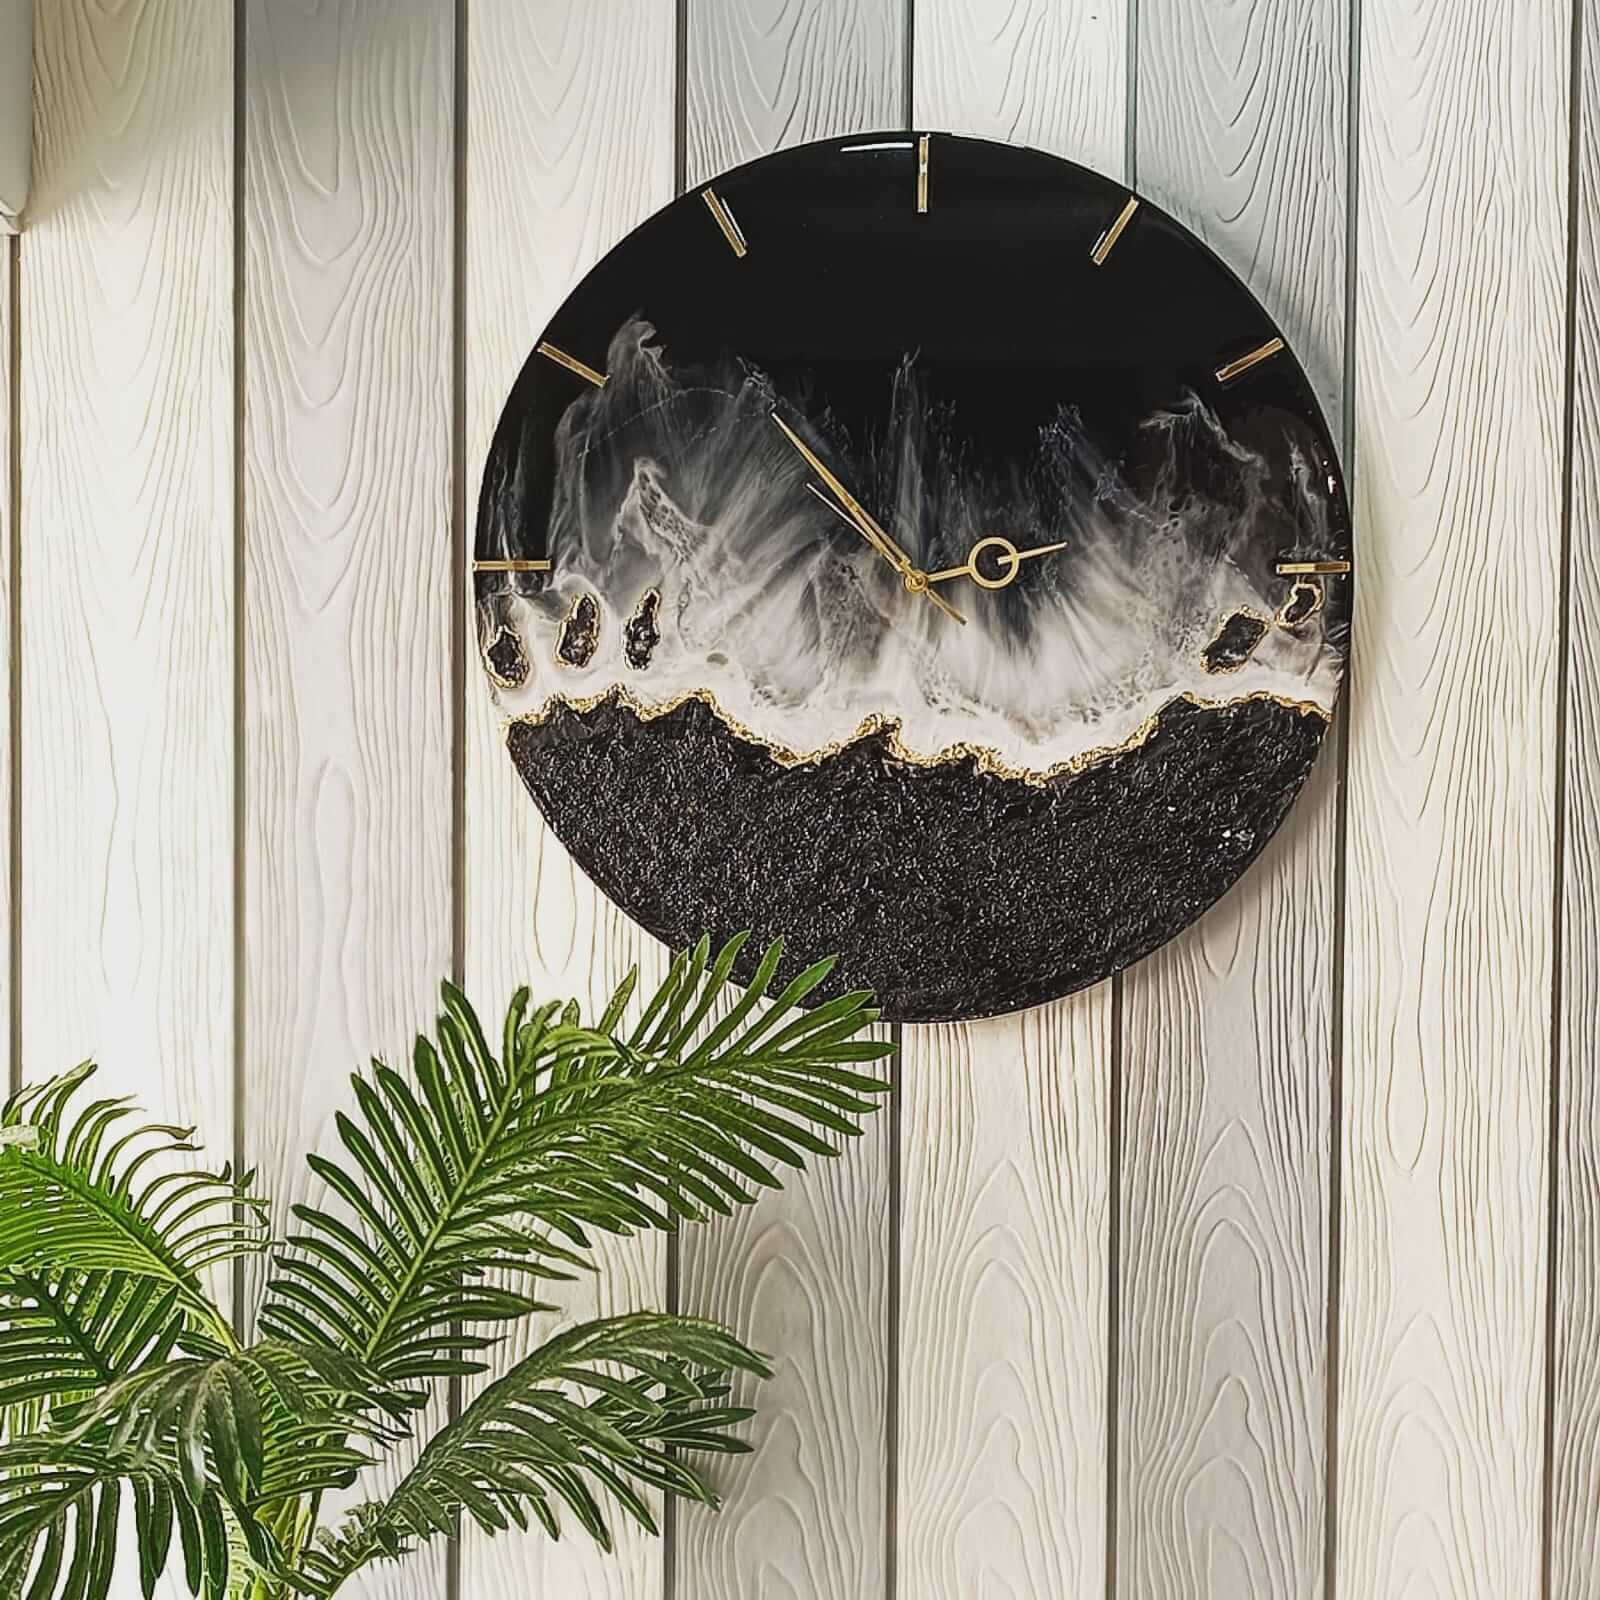 Black Abstract Epoxy Resin Wall Clock For Home Decor-1